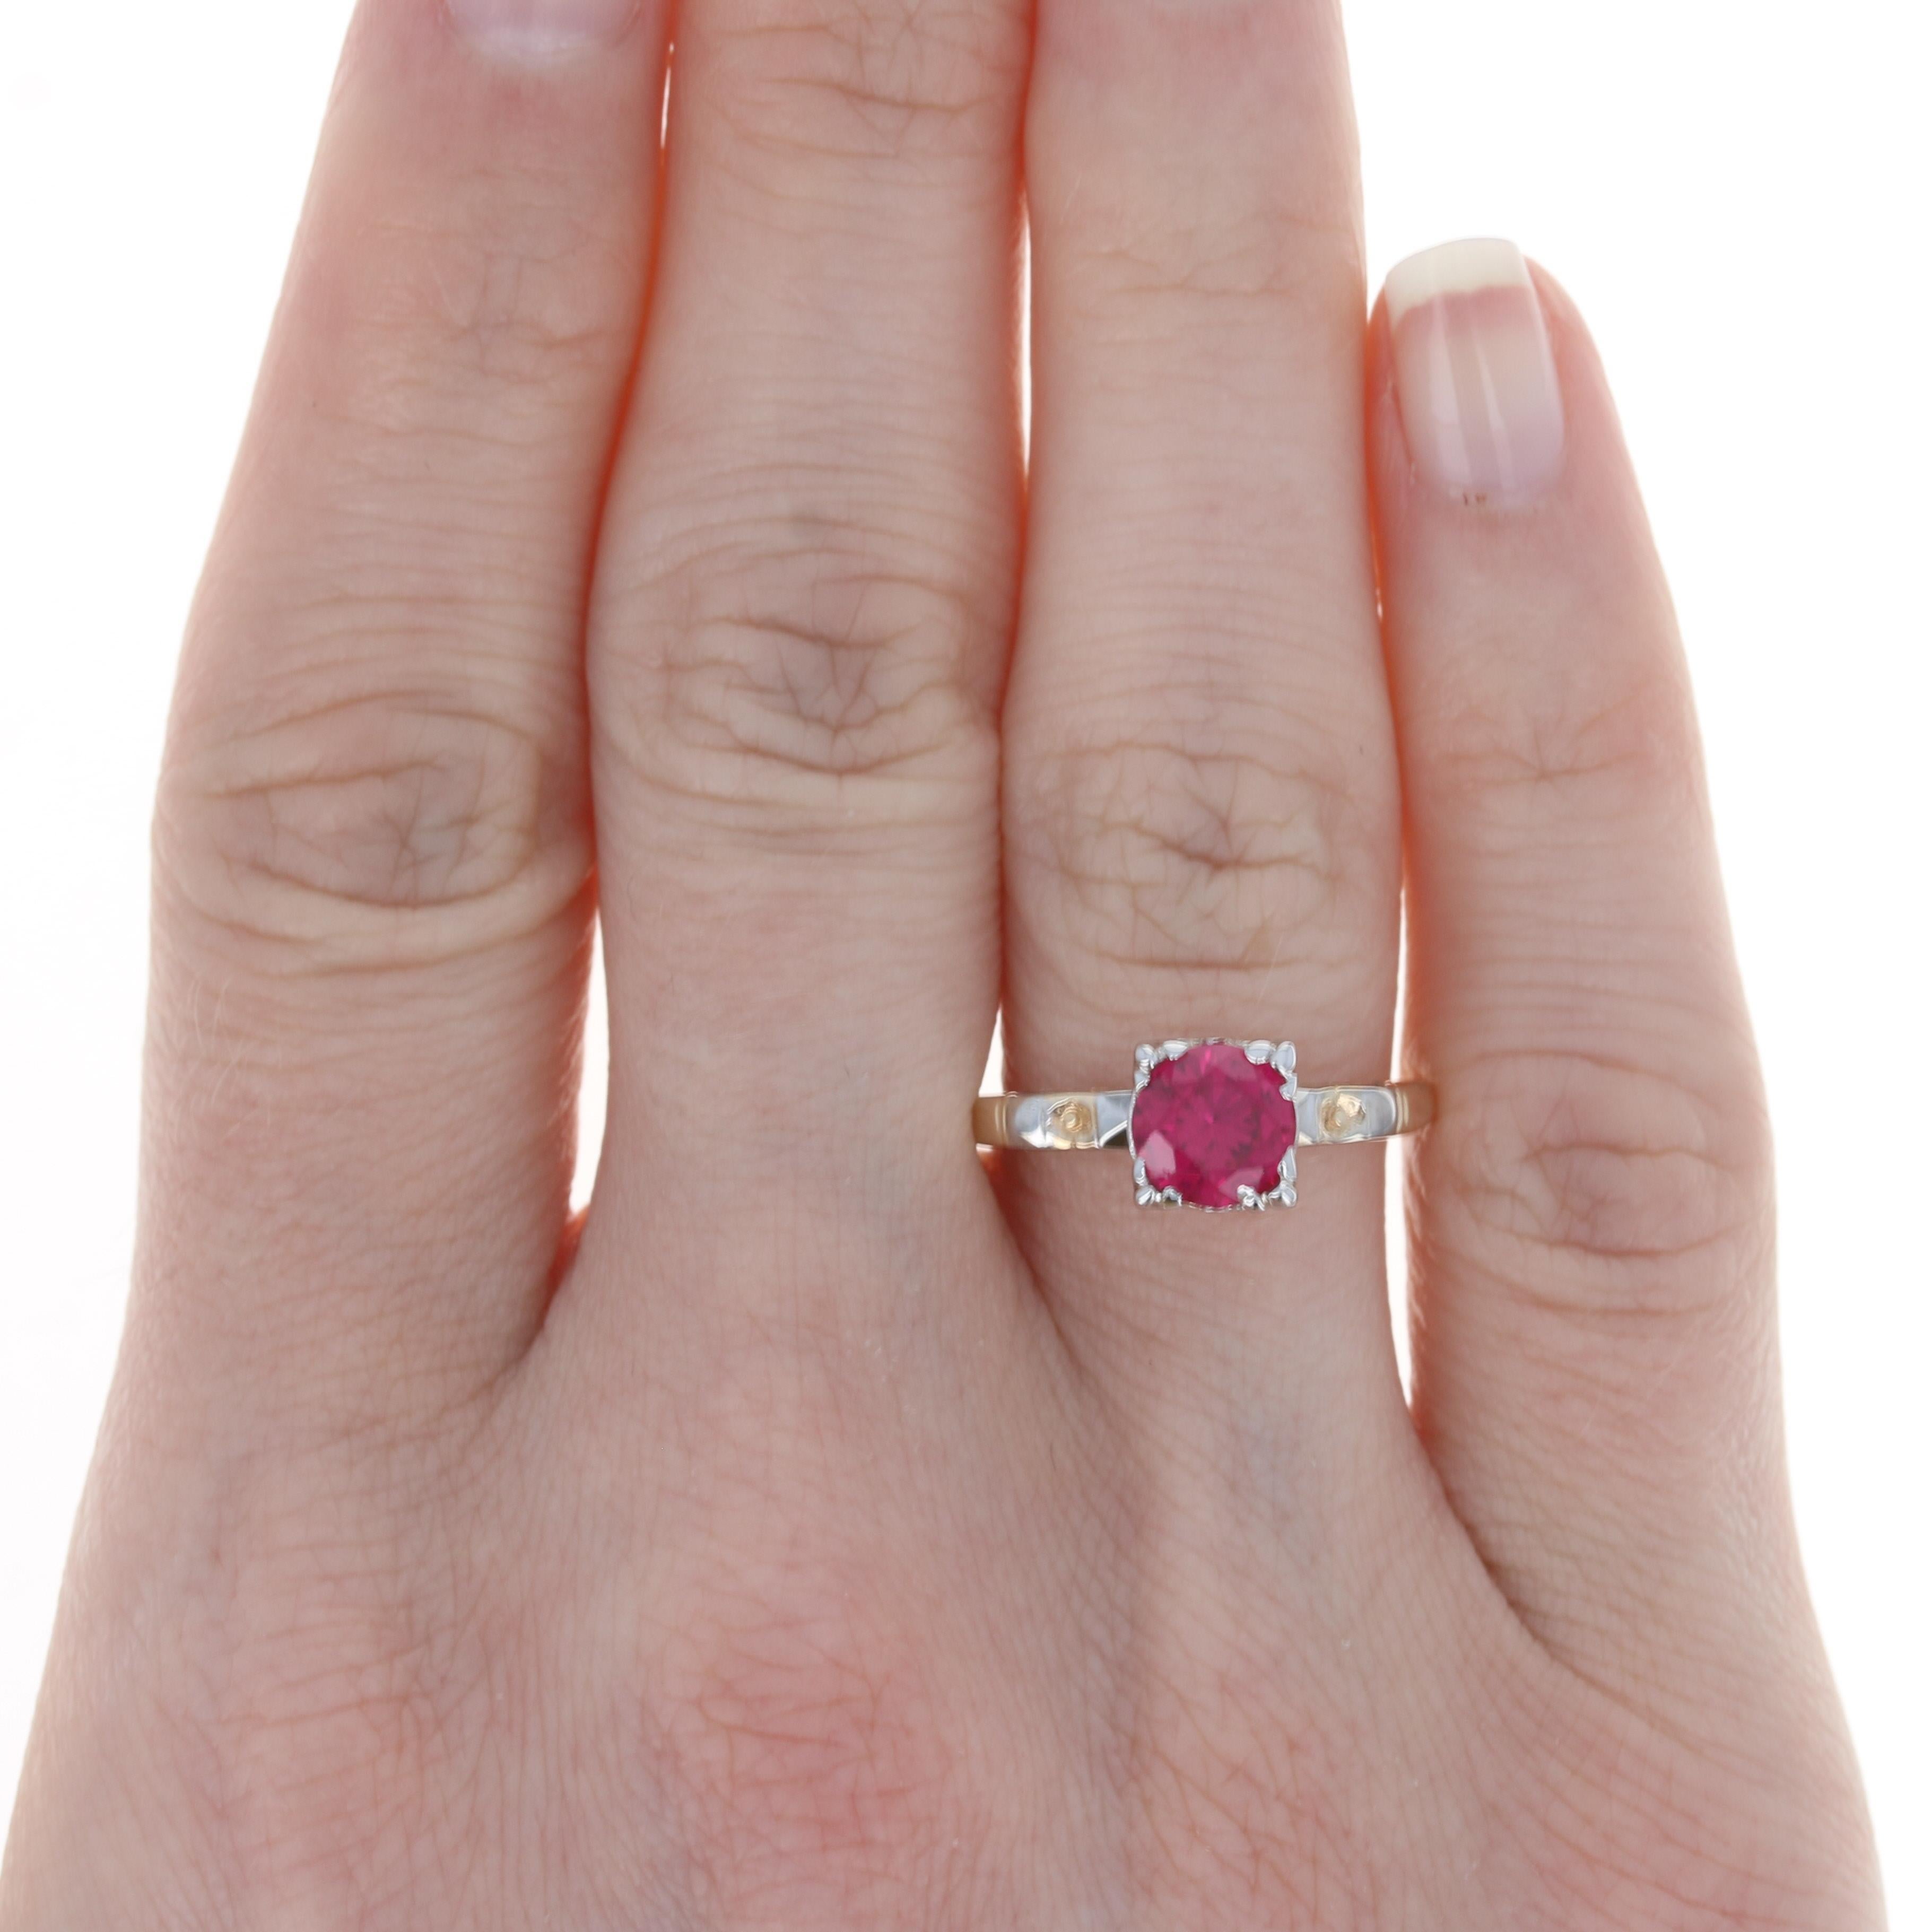 Size: 8
Sizing Fee: Up 2 sizes for $35 or down 3 sizes for $30

Era: Vintage 

Metal Content: 14k Yellow Gold & 14k White Gold 

Stone Information: 
Synthetic Ruby
Carat: 1.50ct
Cut: Round Brilliant 
Color: Pinkish Red
Diameter: 6.6mm 

Style: